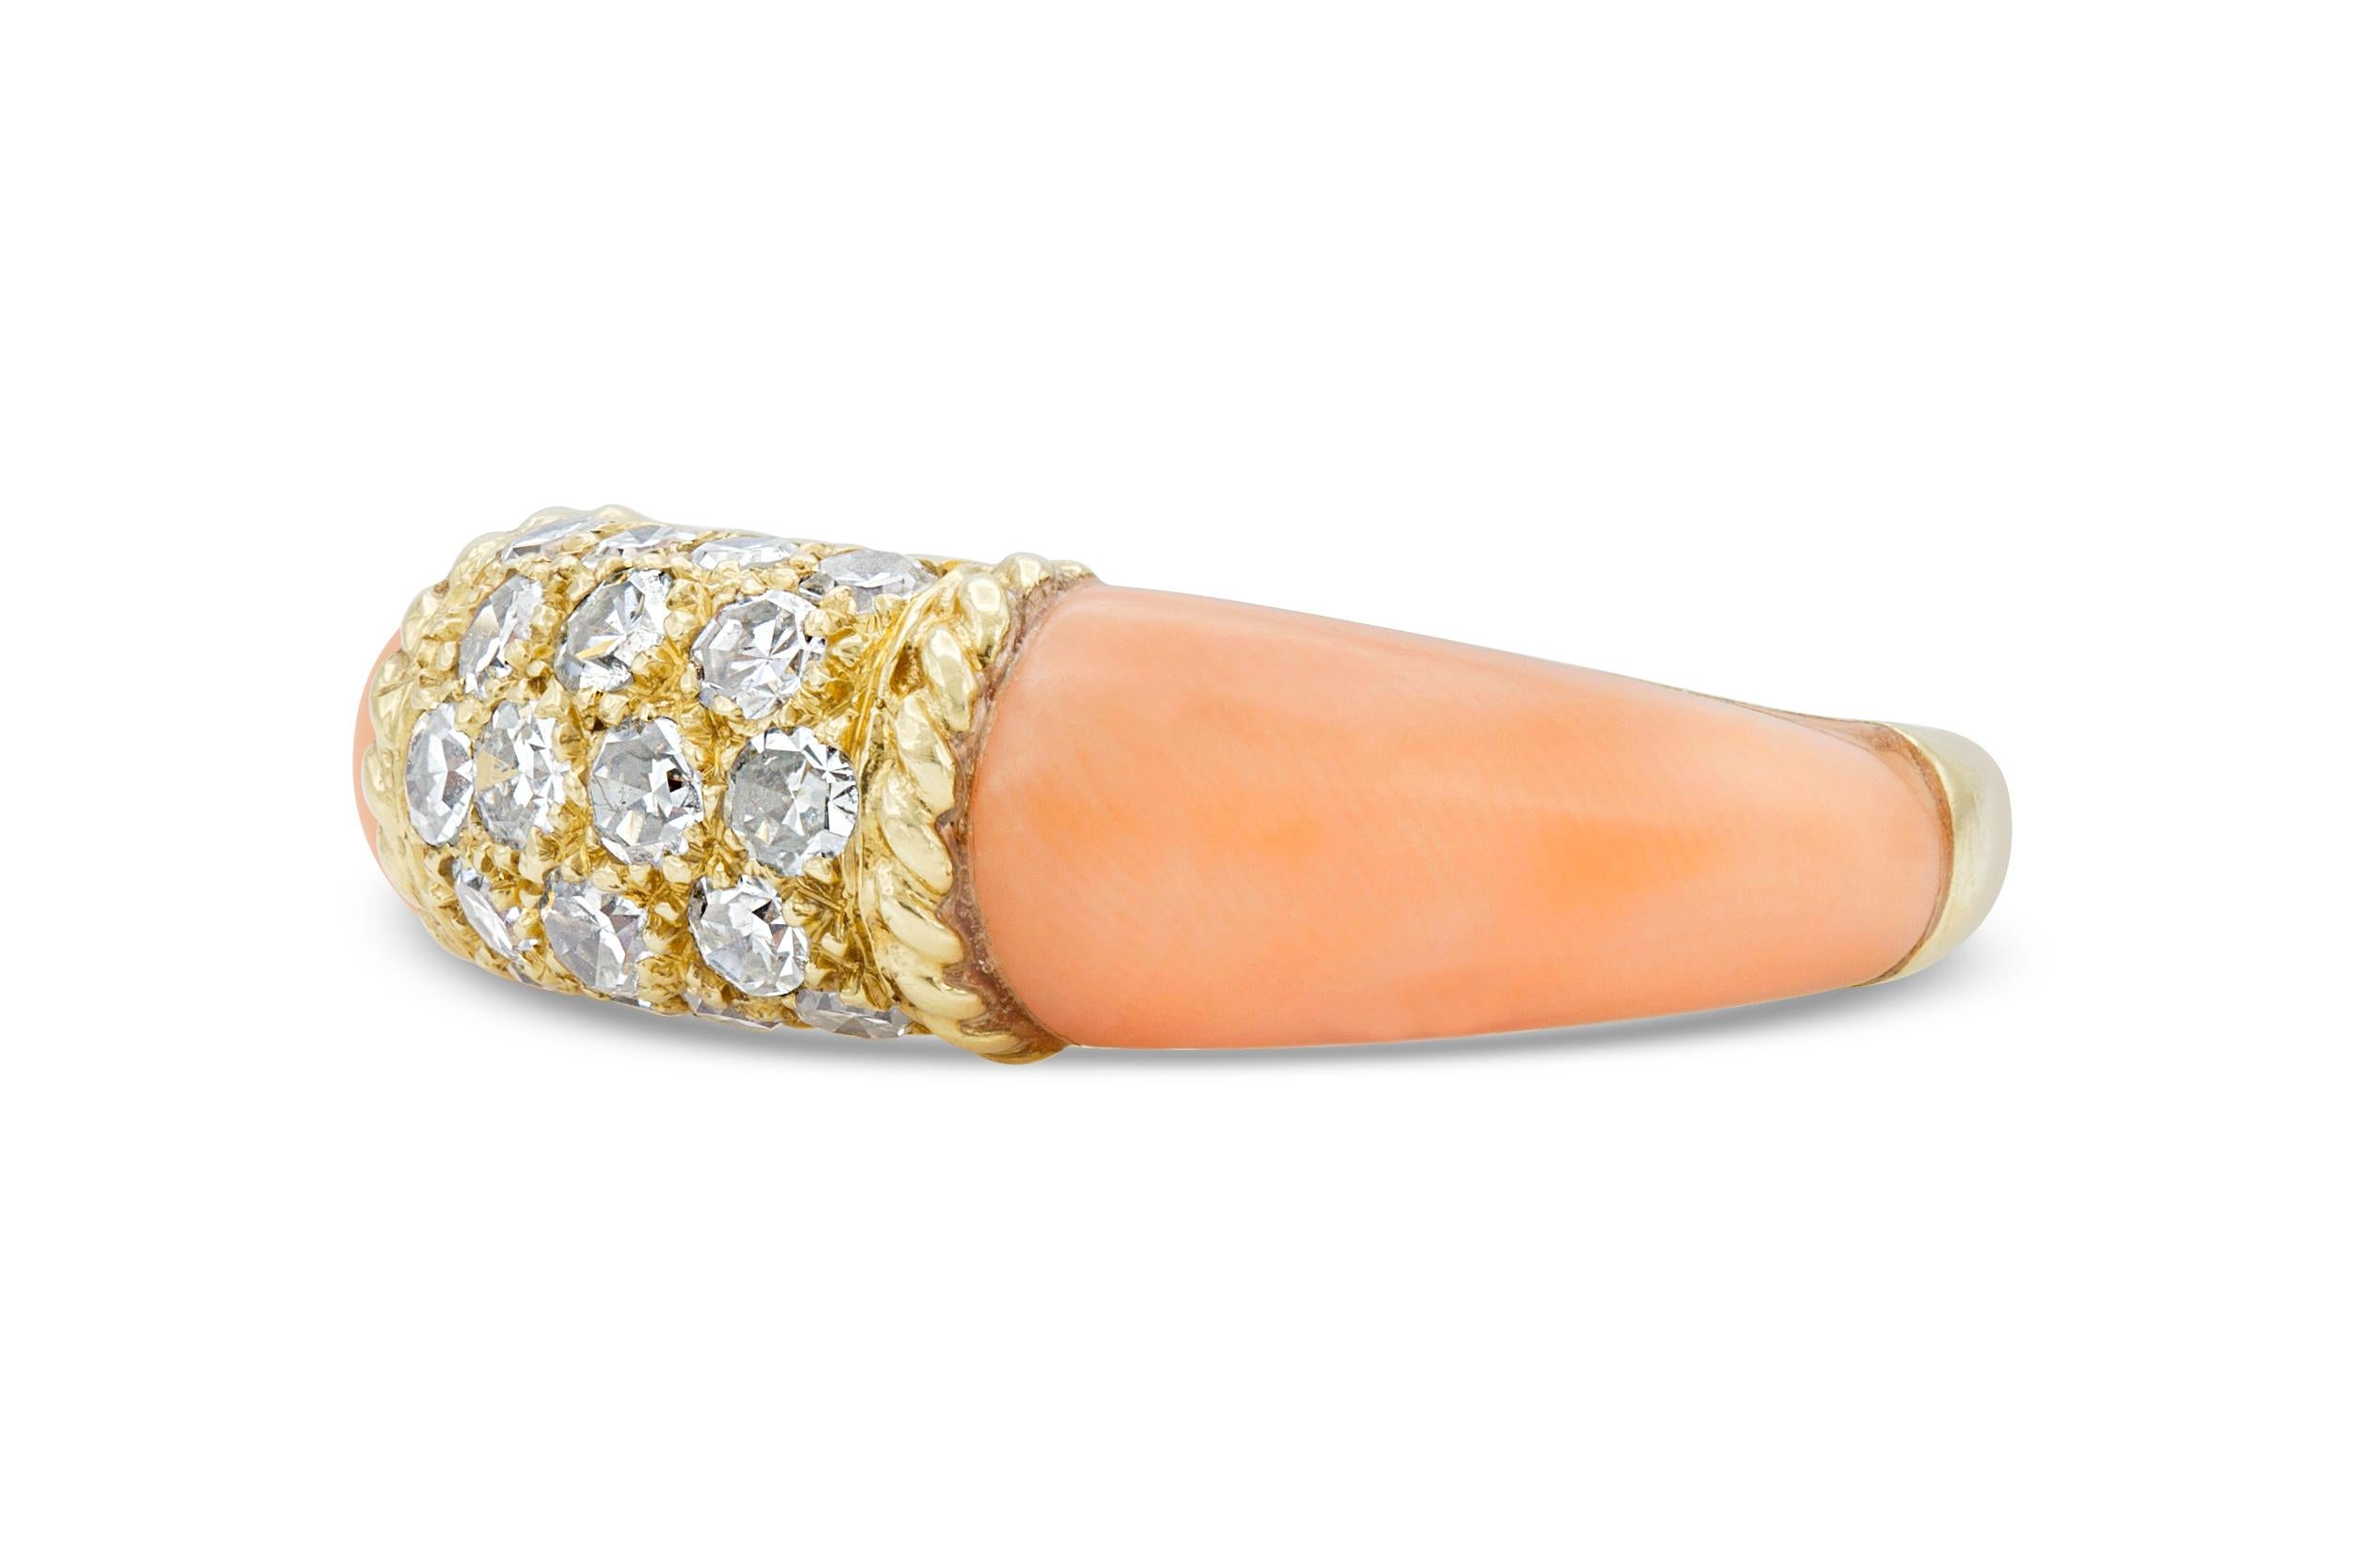 Finely crafted in 18k yellow gold with coral and round brilliant cut diamonds weighing approximately a total of 0.50 carat.
Signed by Van Cleef & Arpels
Size 5 3/4